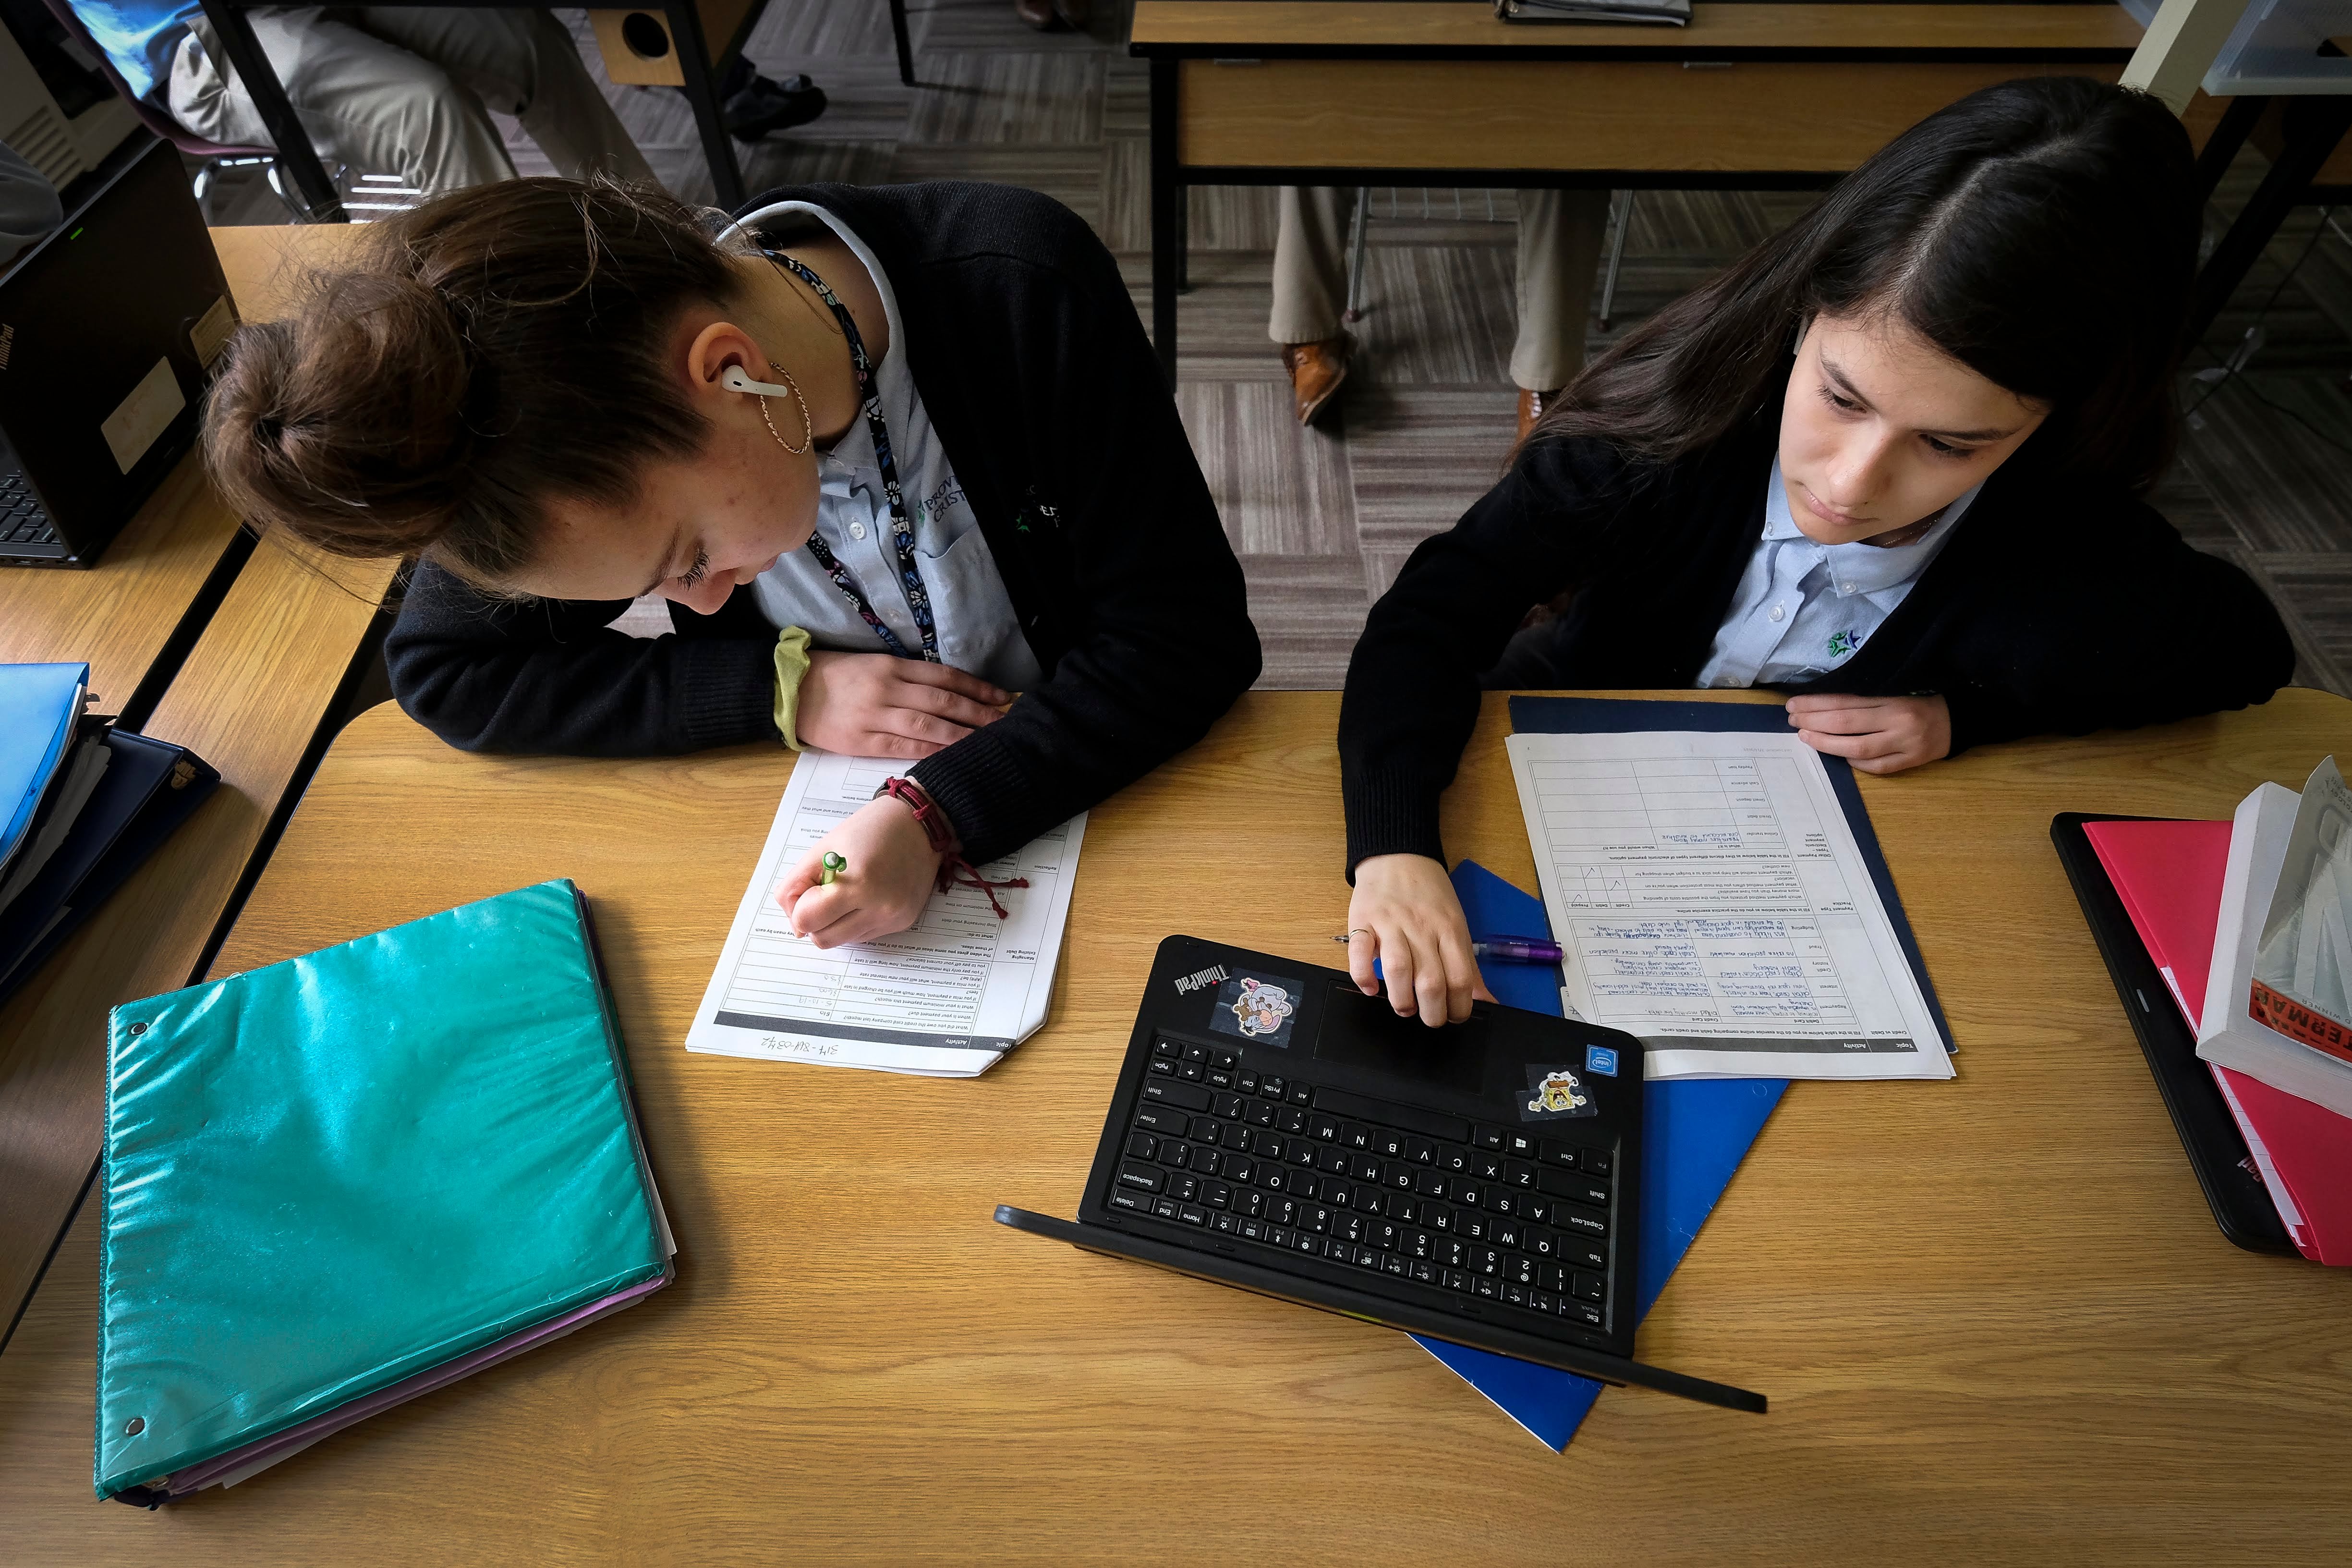 Two students sit at a desk working on assignments, while one uses the trackpad of a laptop in front of them.